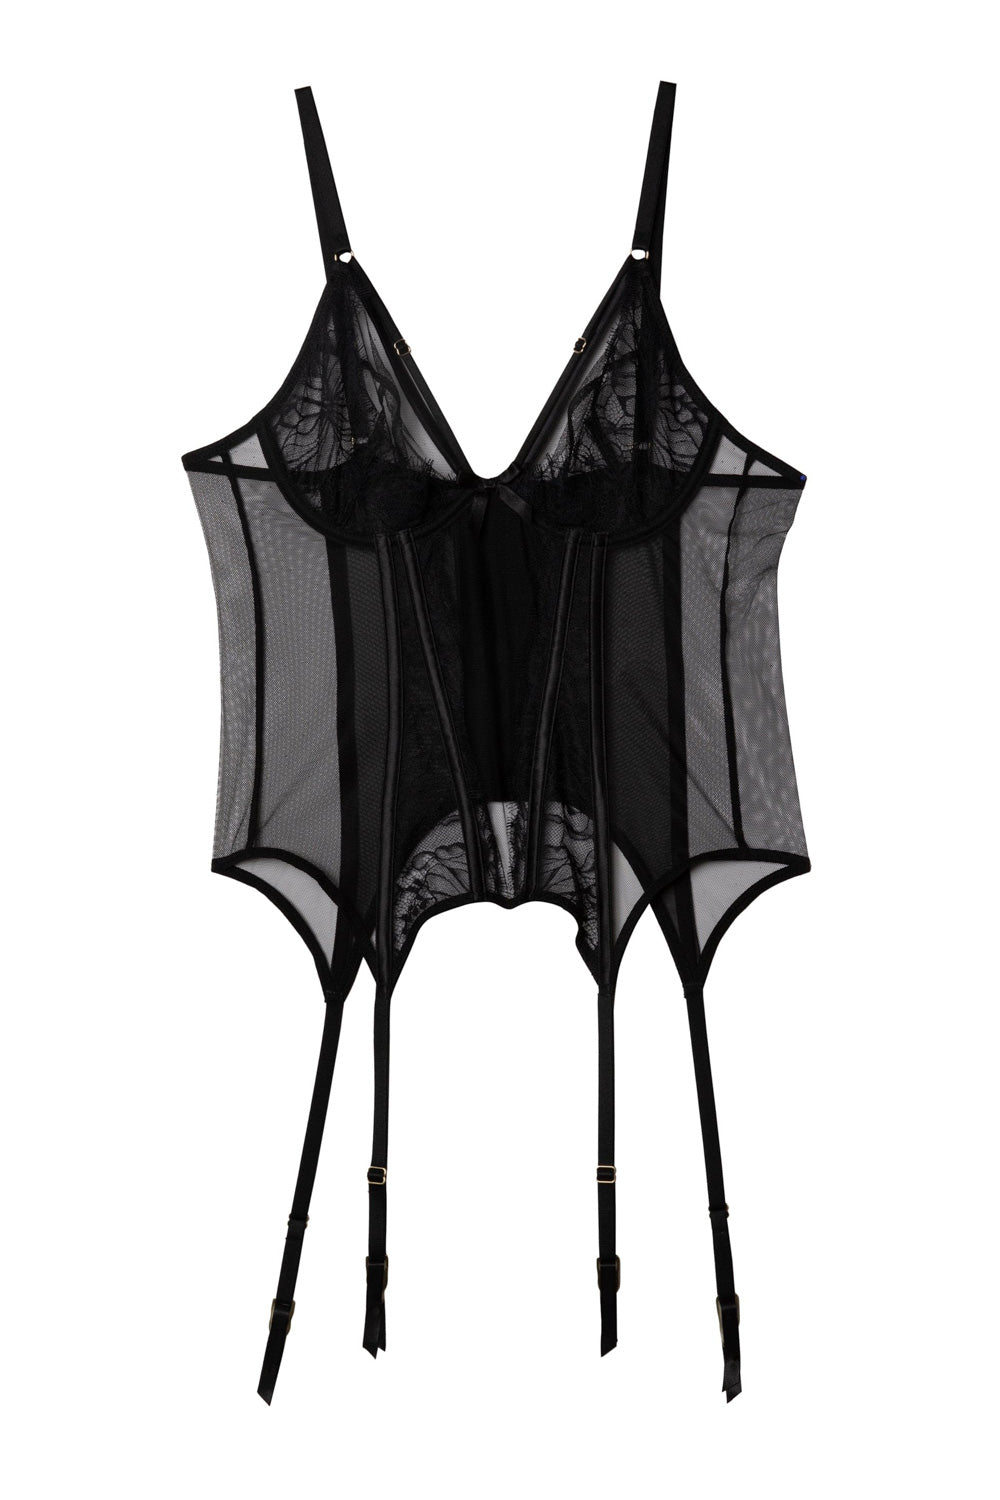 Playful Promises Fallon Black Basque at The Hosiery Box Basques